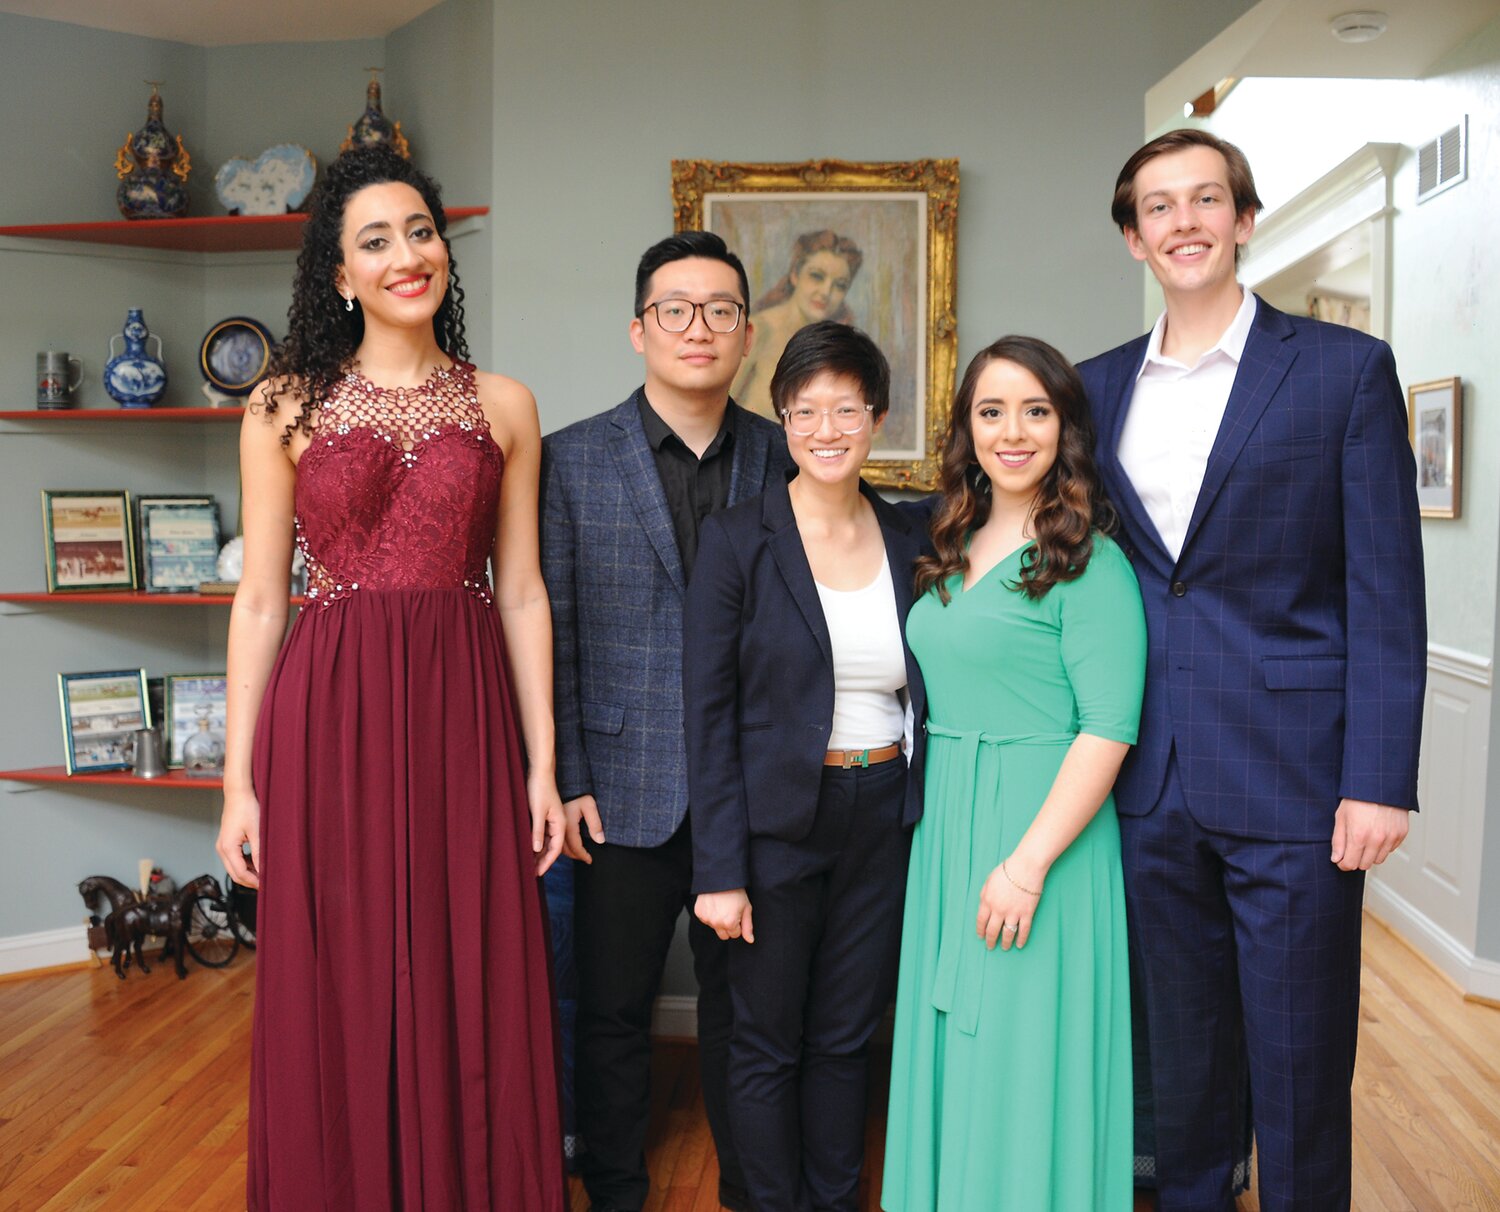 The fundraising cocktail party in Carversville featured resident artists of The Academy of Vocal Arts, from left, Monique Galvao, mezzo-soprano; Yue Wu bass-baritone; accompanying pianist Ting Ting Wong; Ethel Trujillo, soprano; and Matthew Goodheart, tenor.